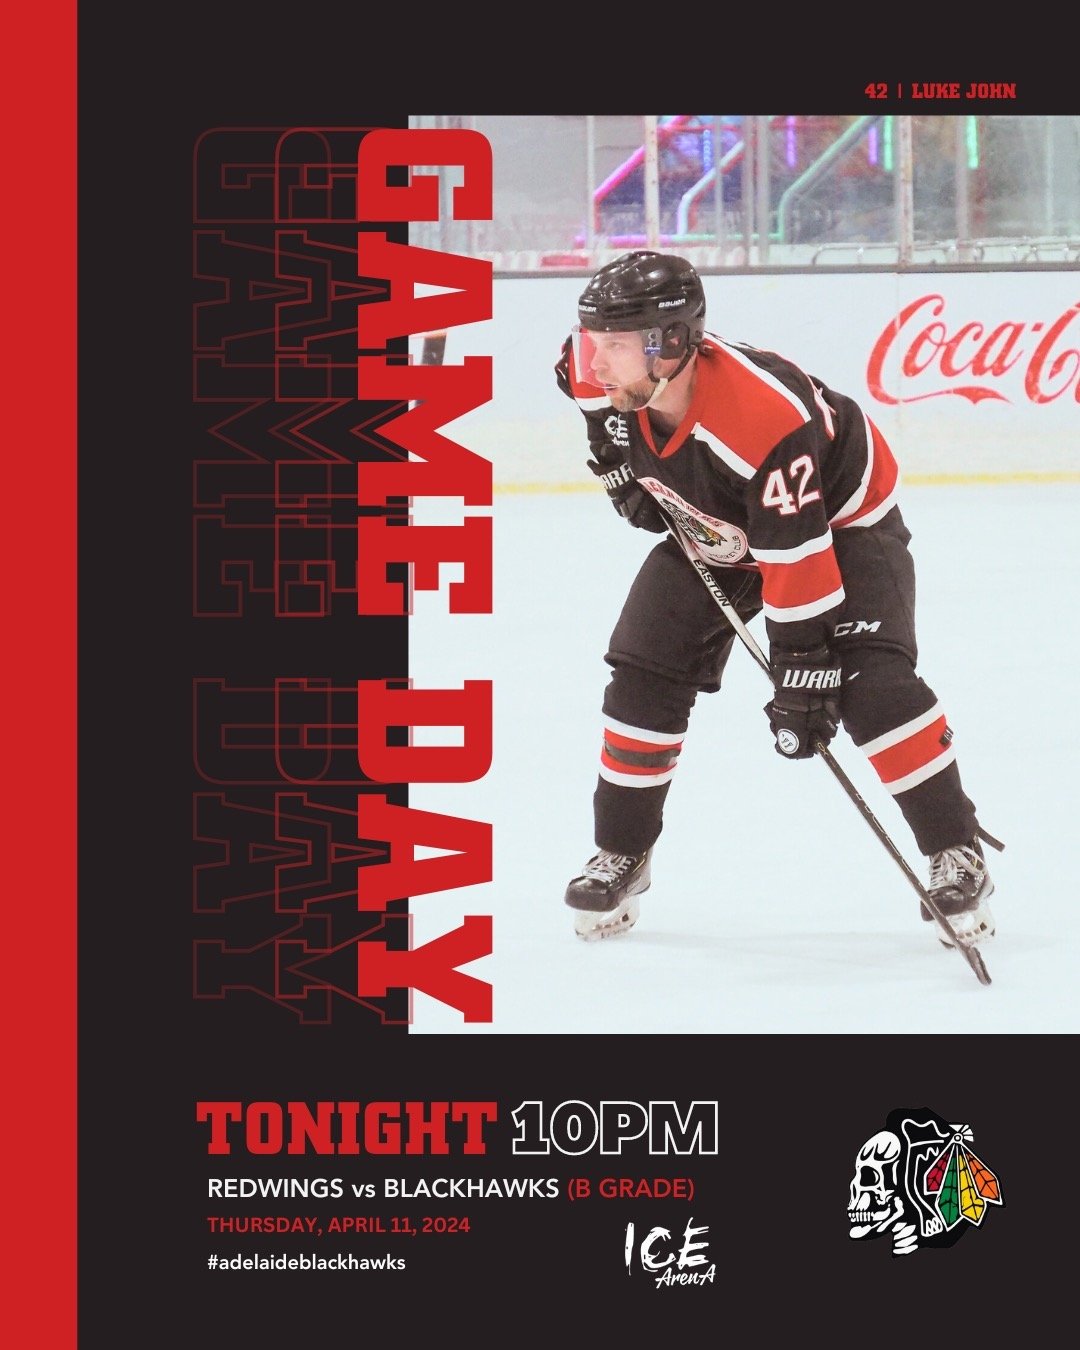 IT&rsquo;S GAME DAY! B Grade - Game 3. Late night game night! We will see you there at 10pm for the @adelaide.redwings and @blackhawks_adelaide B Grade game 🏒❤️🖤